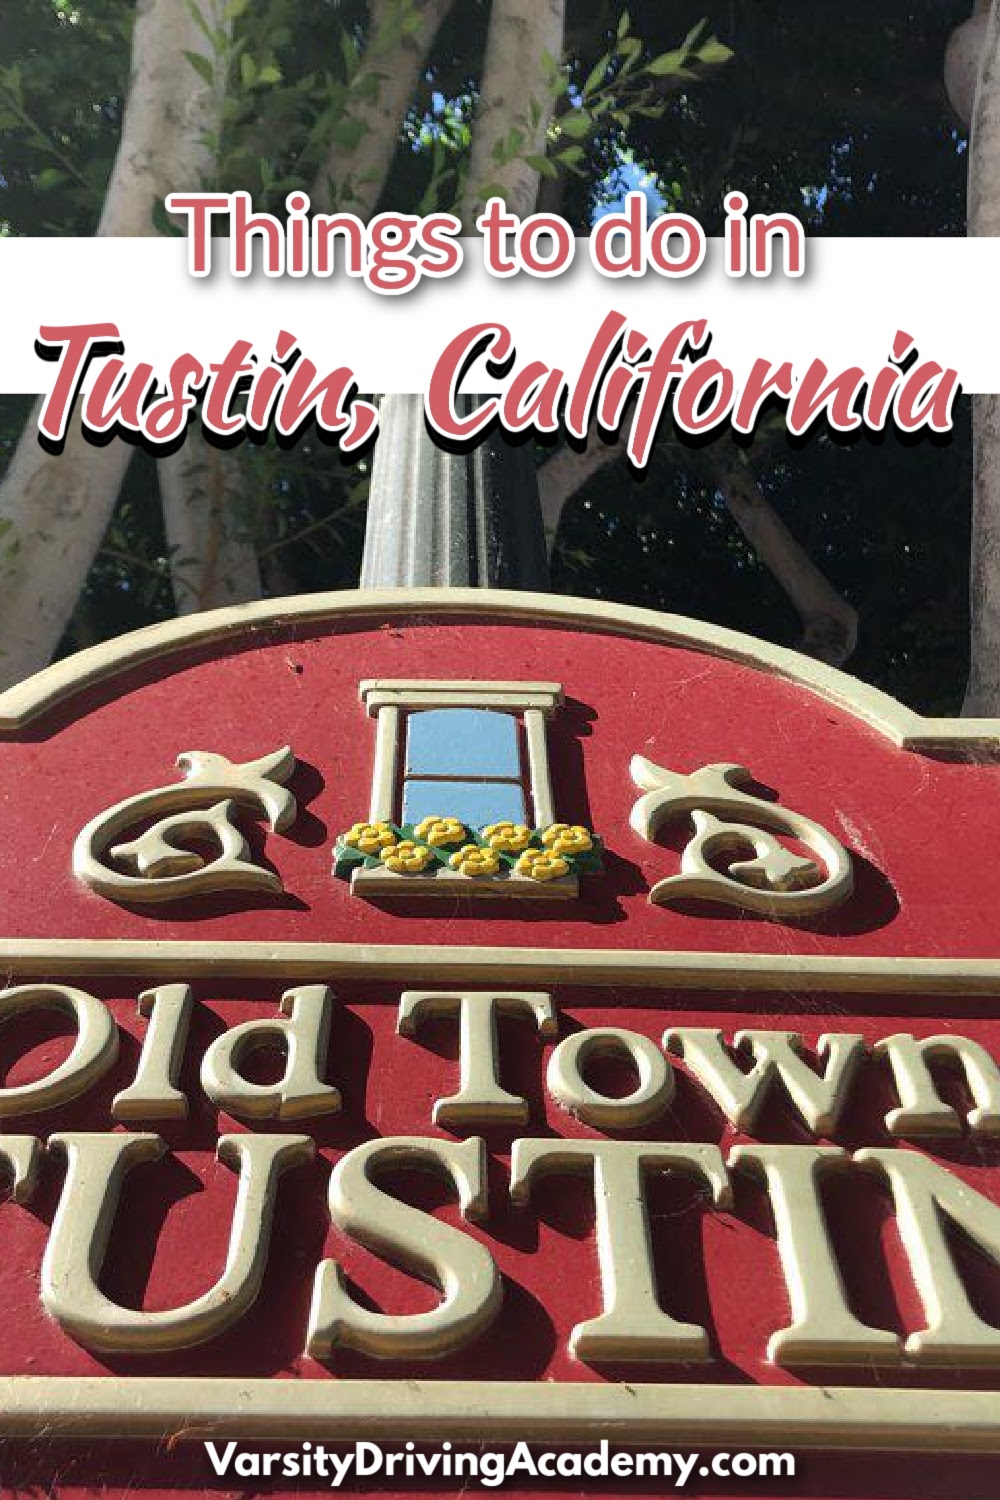 There are many different things to do in Tustin California that help make it one of the top 25 places to live in the world.